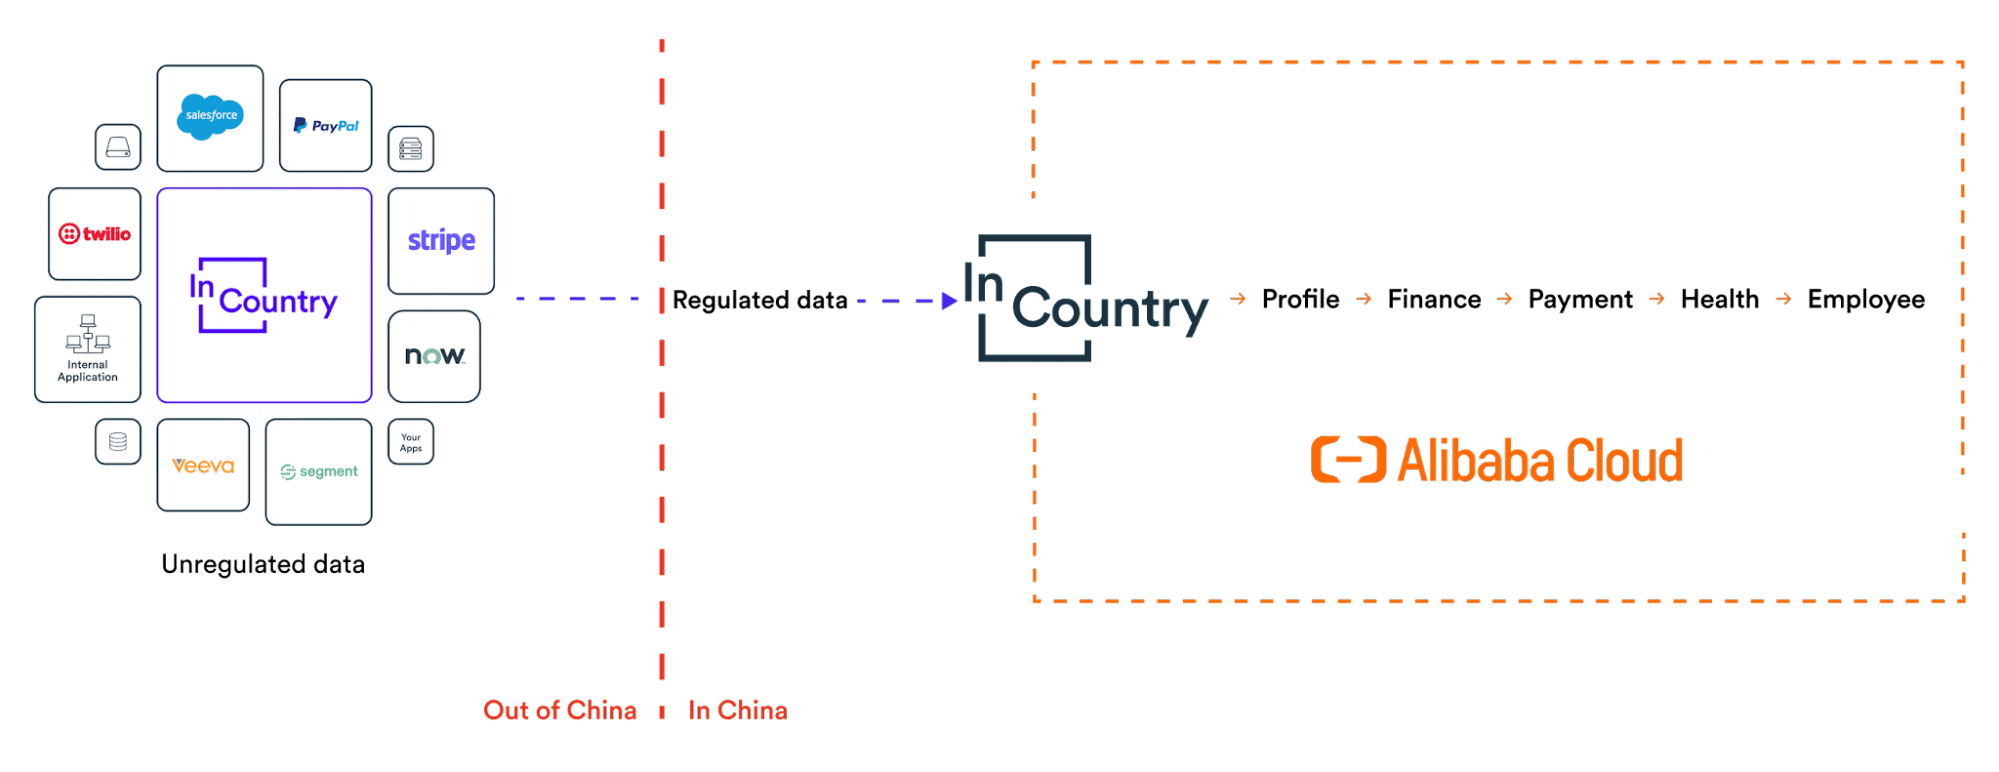 How InCountry for Alibaba Cloud works